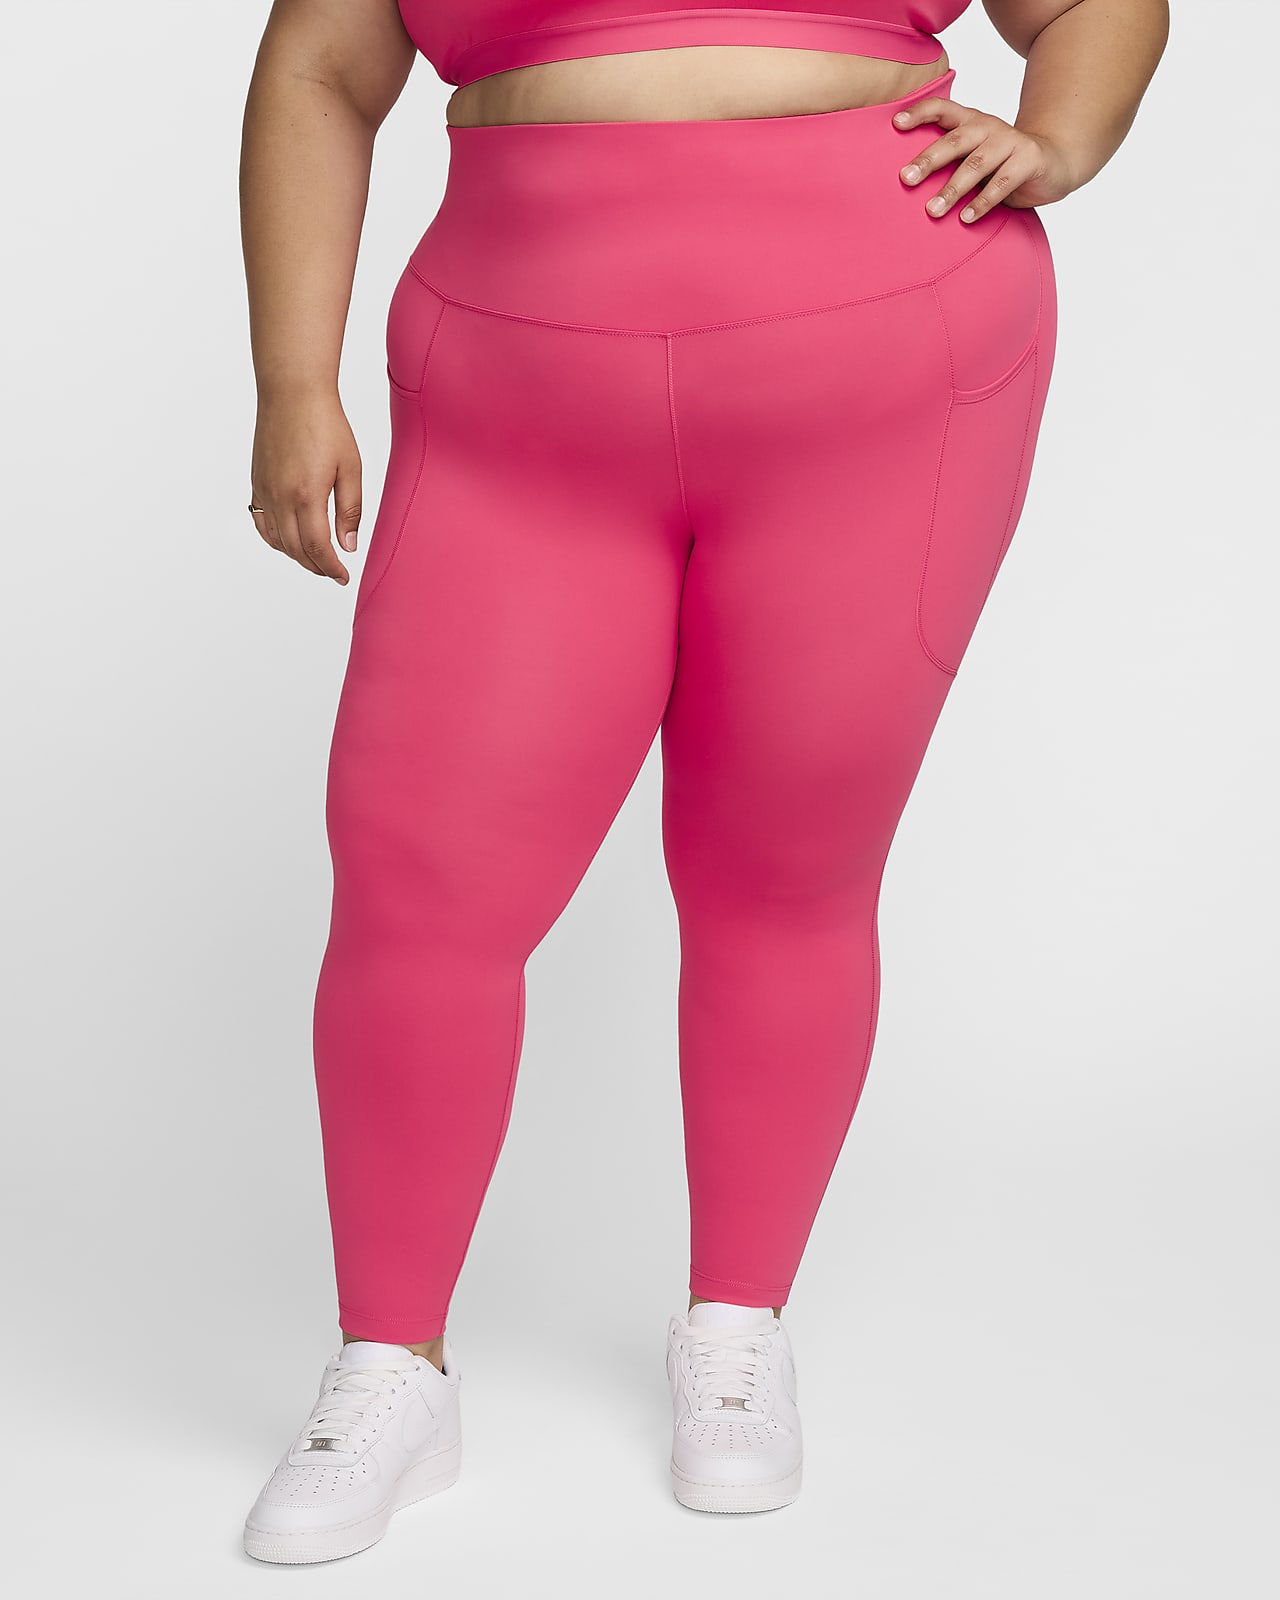 Nike One Women's High-Waisted 7/8 Leggings with Pockets (Plus Size)